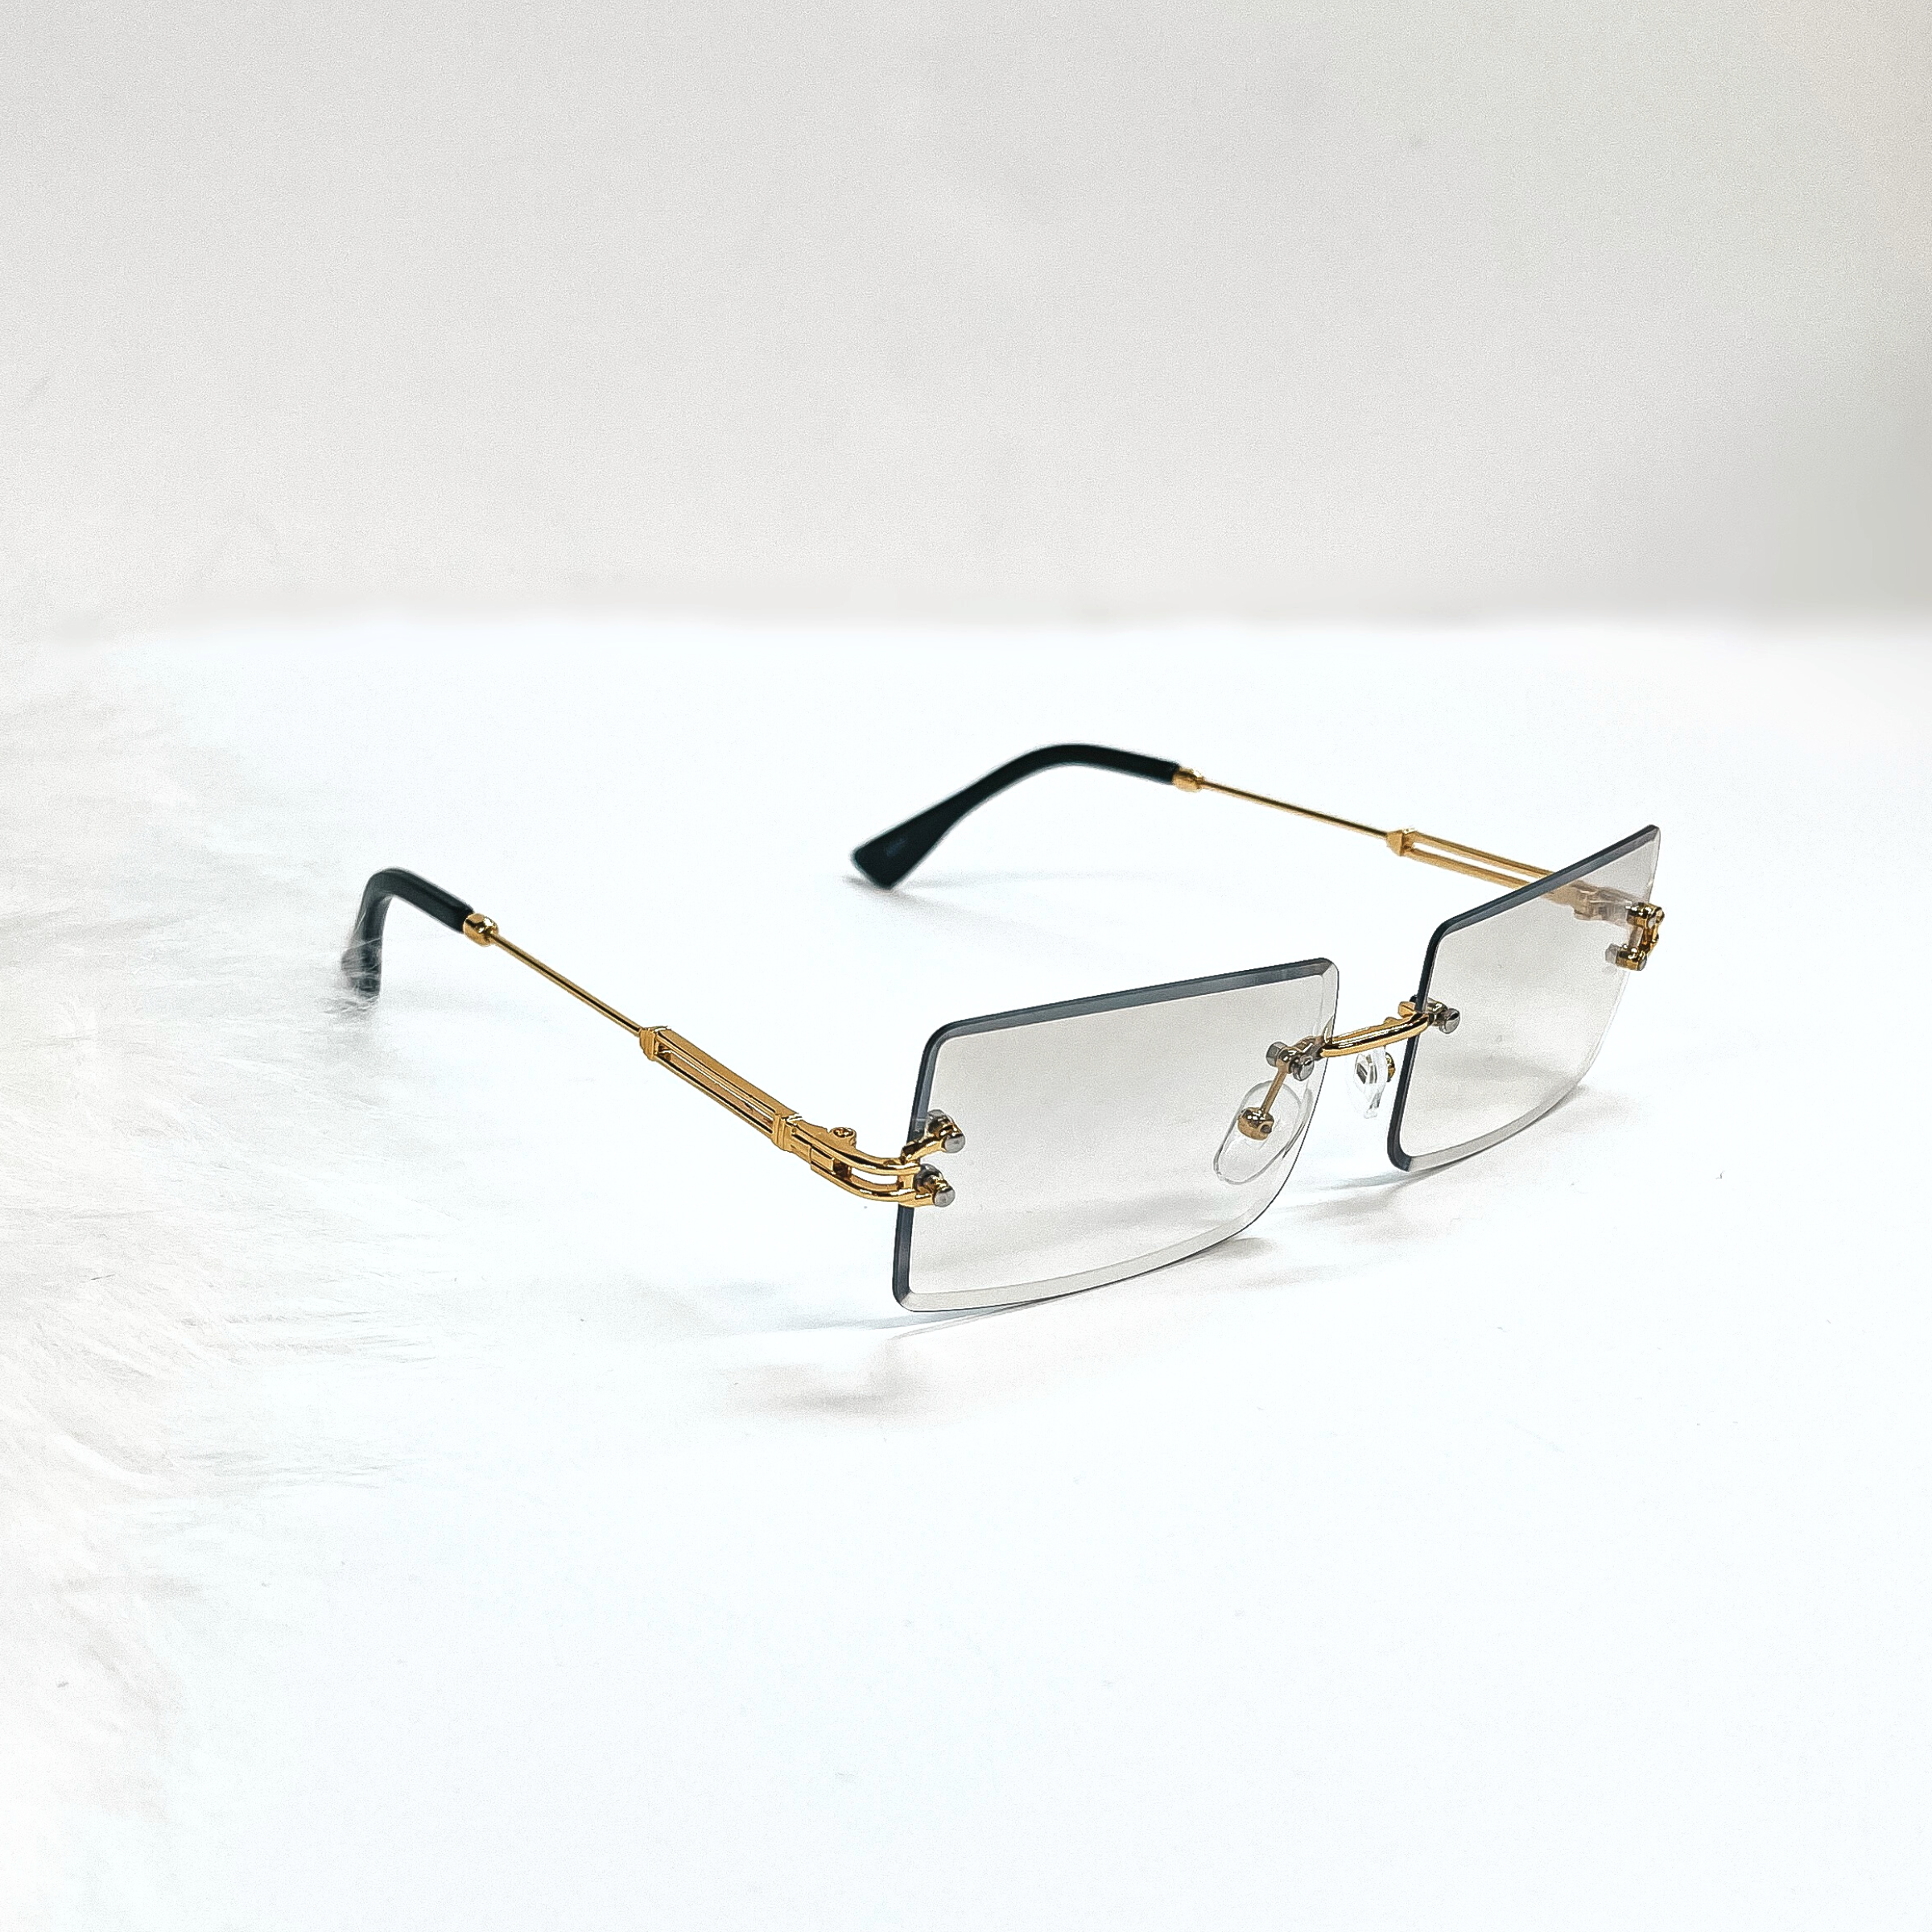 This is a clear grey/brown pair of sunglasses, the lenses are clear brown/grey  with no frame and they have  gold connectors. The ear pieces are black. These sunglasses are taken  on a white background with a piece of white fur in the side as decor.